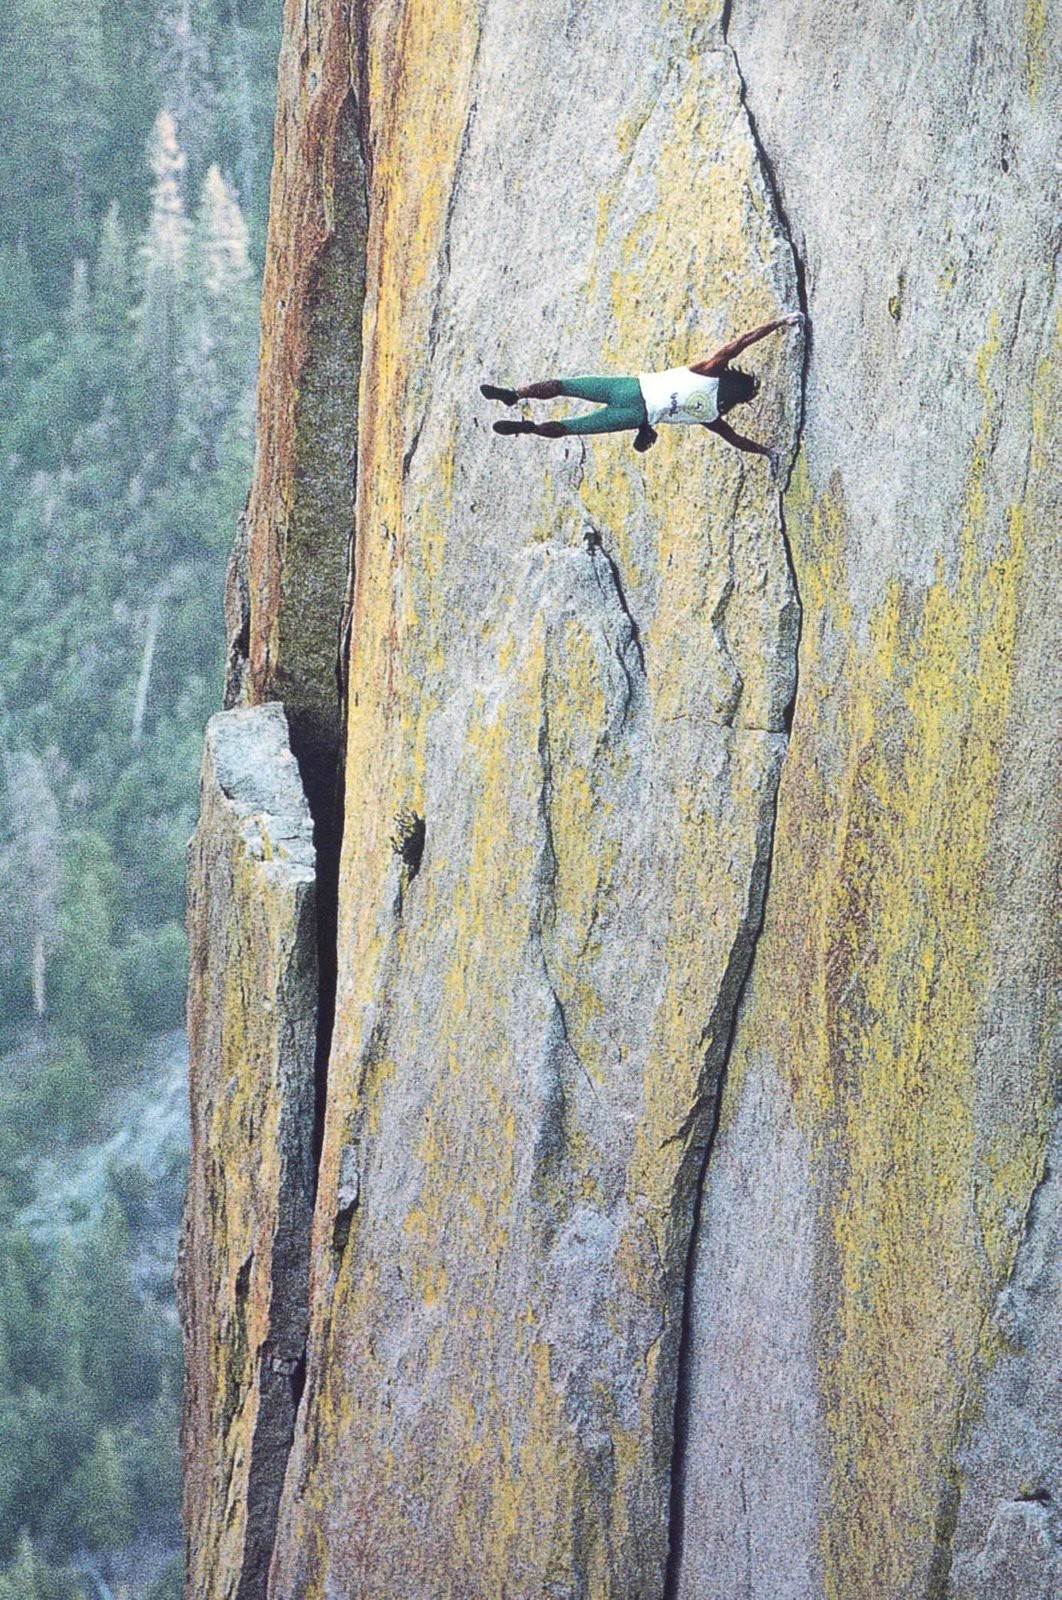 Free Solo Climber Dan Osman- Dan Osman died November 23, 1998 at the age of 35 after his rope failed while performing a "controlled free-fall" jump from the Leaning Tower rock formation inYosemite National Park. Osman had come back to Yosemite to dismantle the jump tower but apparently decided to make several jumps before doing so. The failure was investigated by the National Park Service with assistance from Chris Harmston, Quality Assurance Manager atBlack Diamond Equipment. Harmston concluded that a change in jump site angle probably caused the ropes to cross and entangle, leading to the rope cutting by melting. Miles Daisher, who was with Osman when he made the jump, stated that the ropes used in his fatal jump had been exposed to inclement weather - including rain and snow - for more than a month before the fatal jump, but that the same ropes were used for several shorter jumps on the previous and same day.